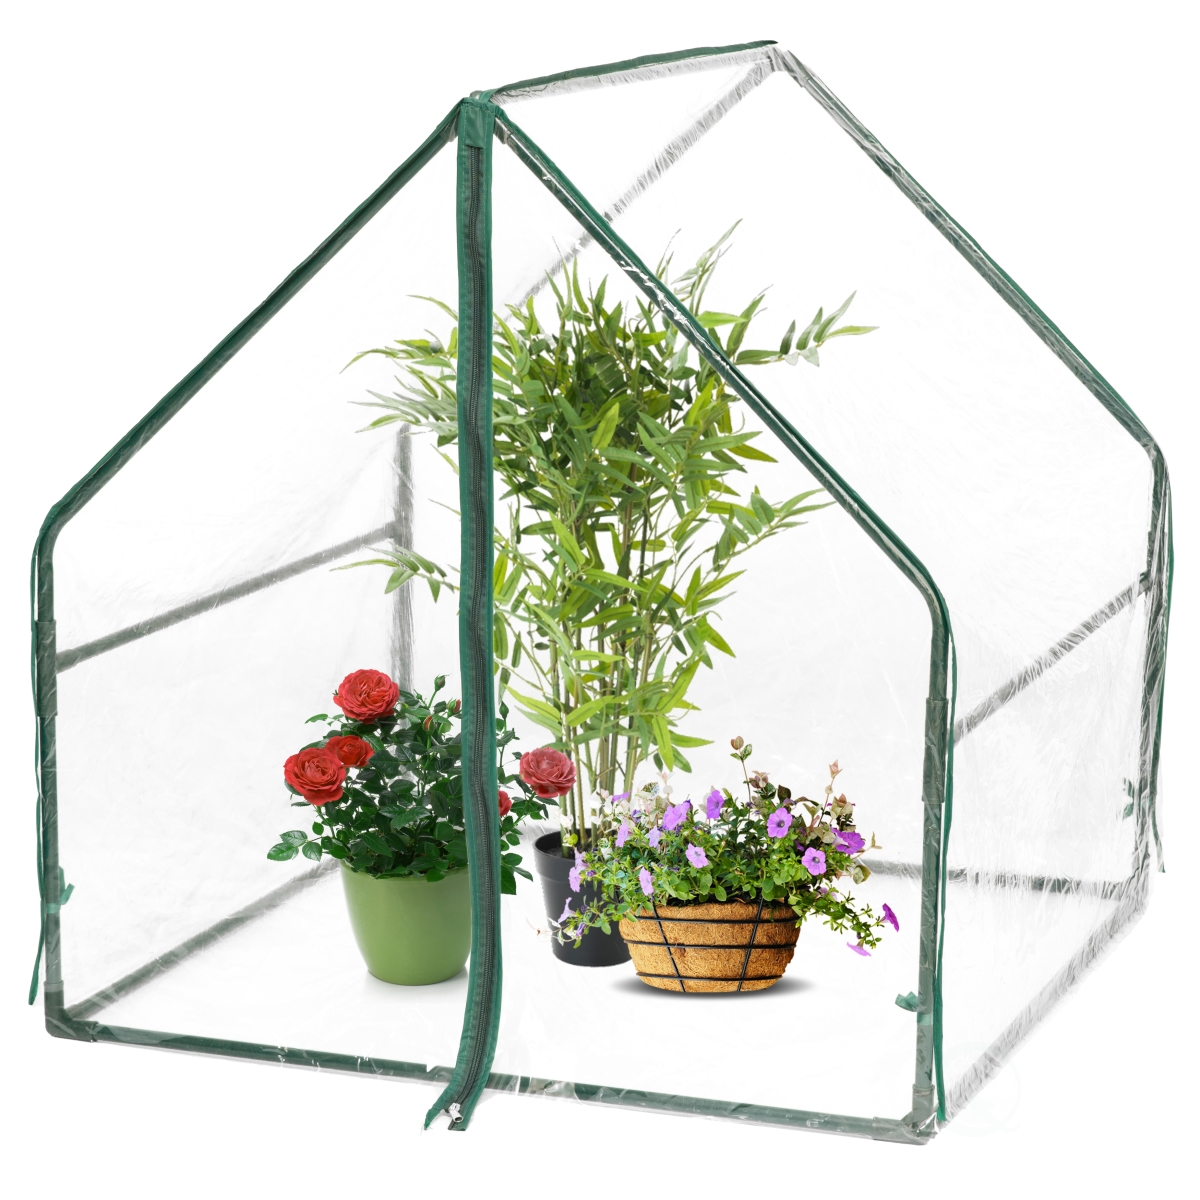 Picture of Gardenised QI004029.S 36.25 x 36.25 x 36.25 in. Outdoor Waterproof Portable Plant Greenhouse with 2 Clear Zippered Windows, Green - Small